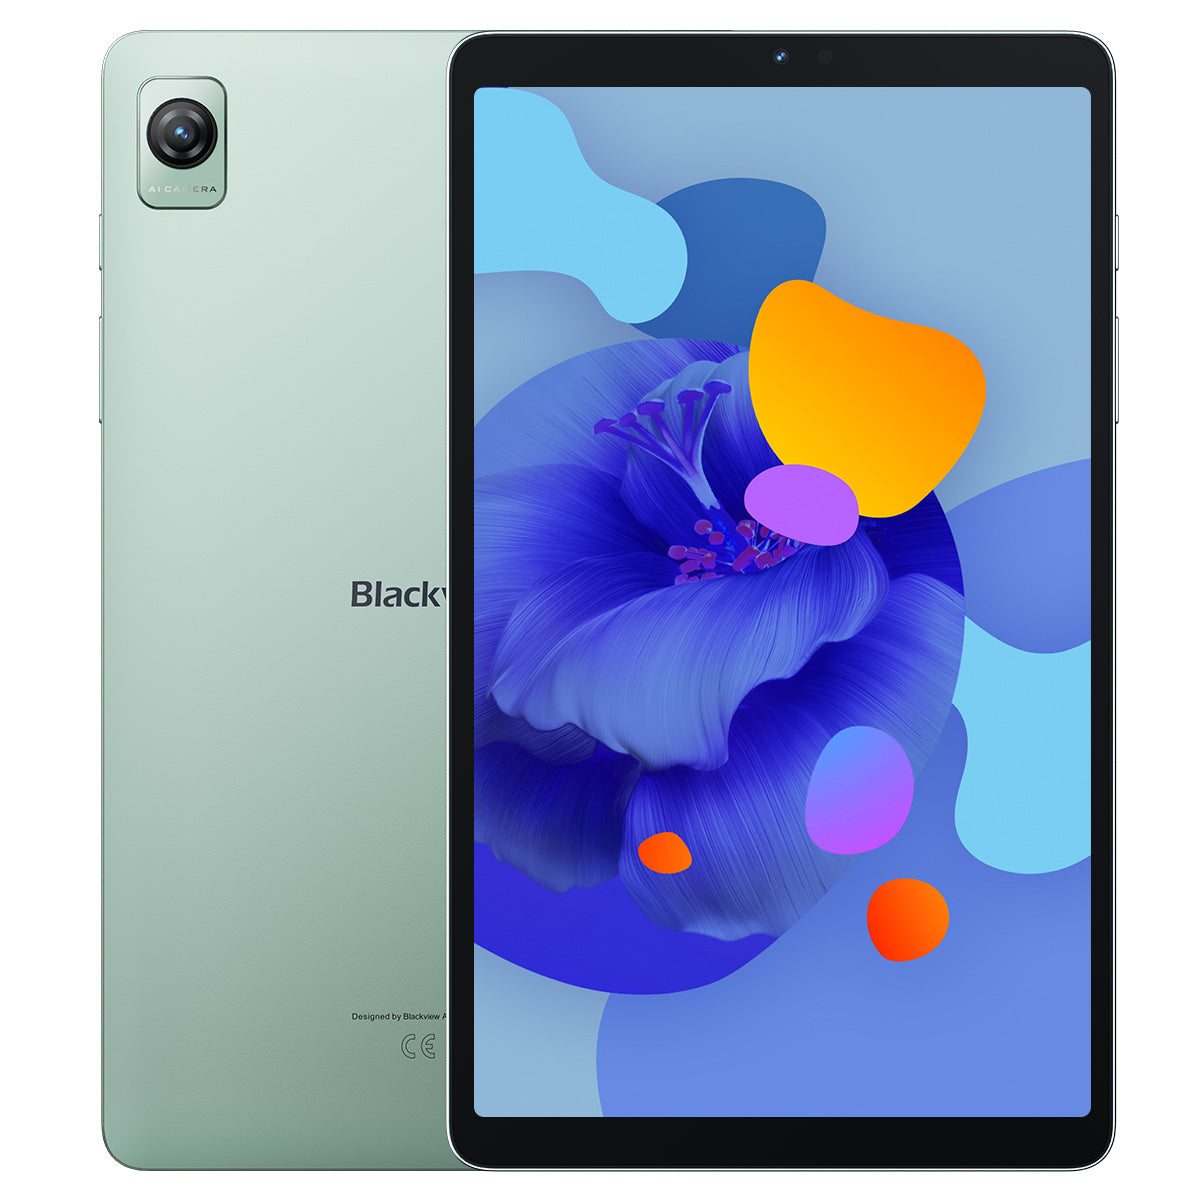 

Blackview Tab 60 8.68-inch Unisoc T606 Octa-core 4GB/6GB+128GB 6050mAh Widevine L1 Support Android Tablet PC 6GB+128GB / Green